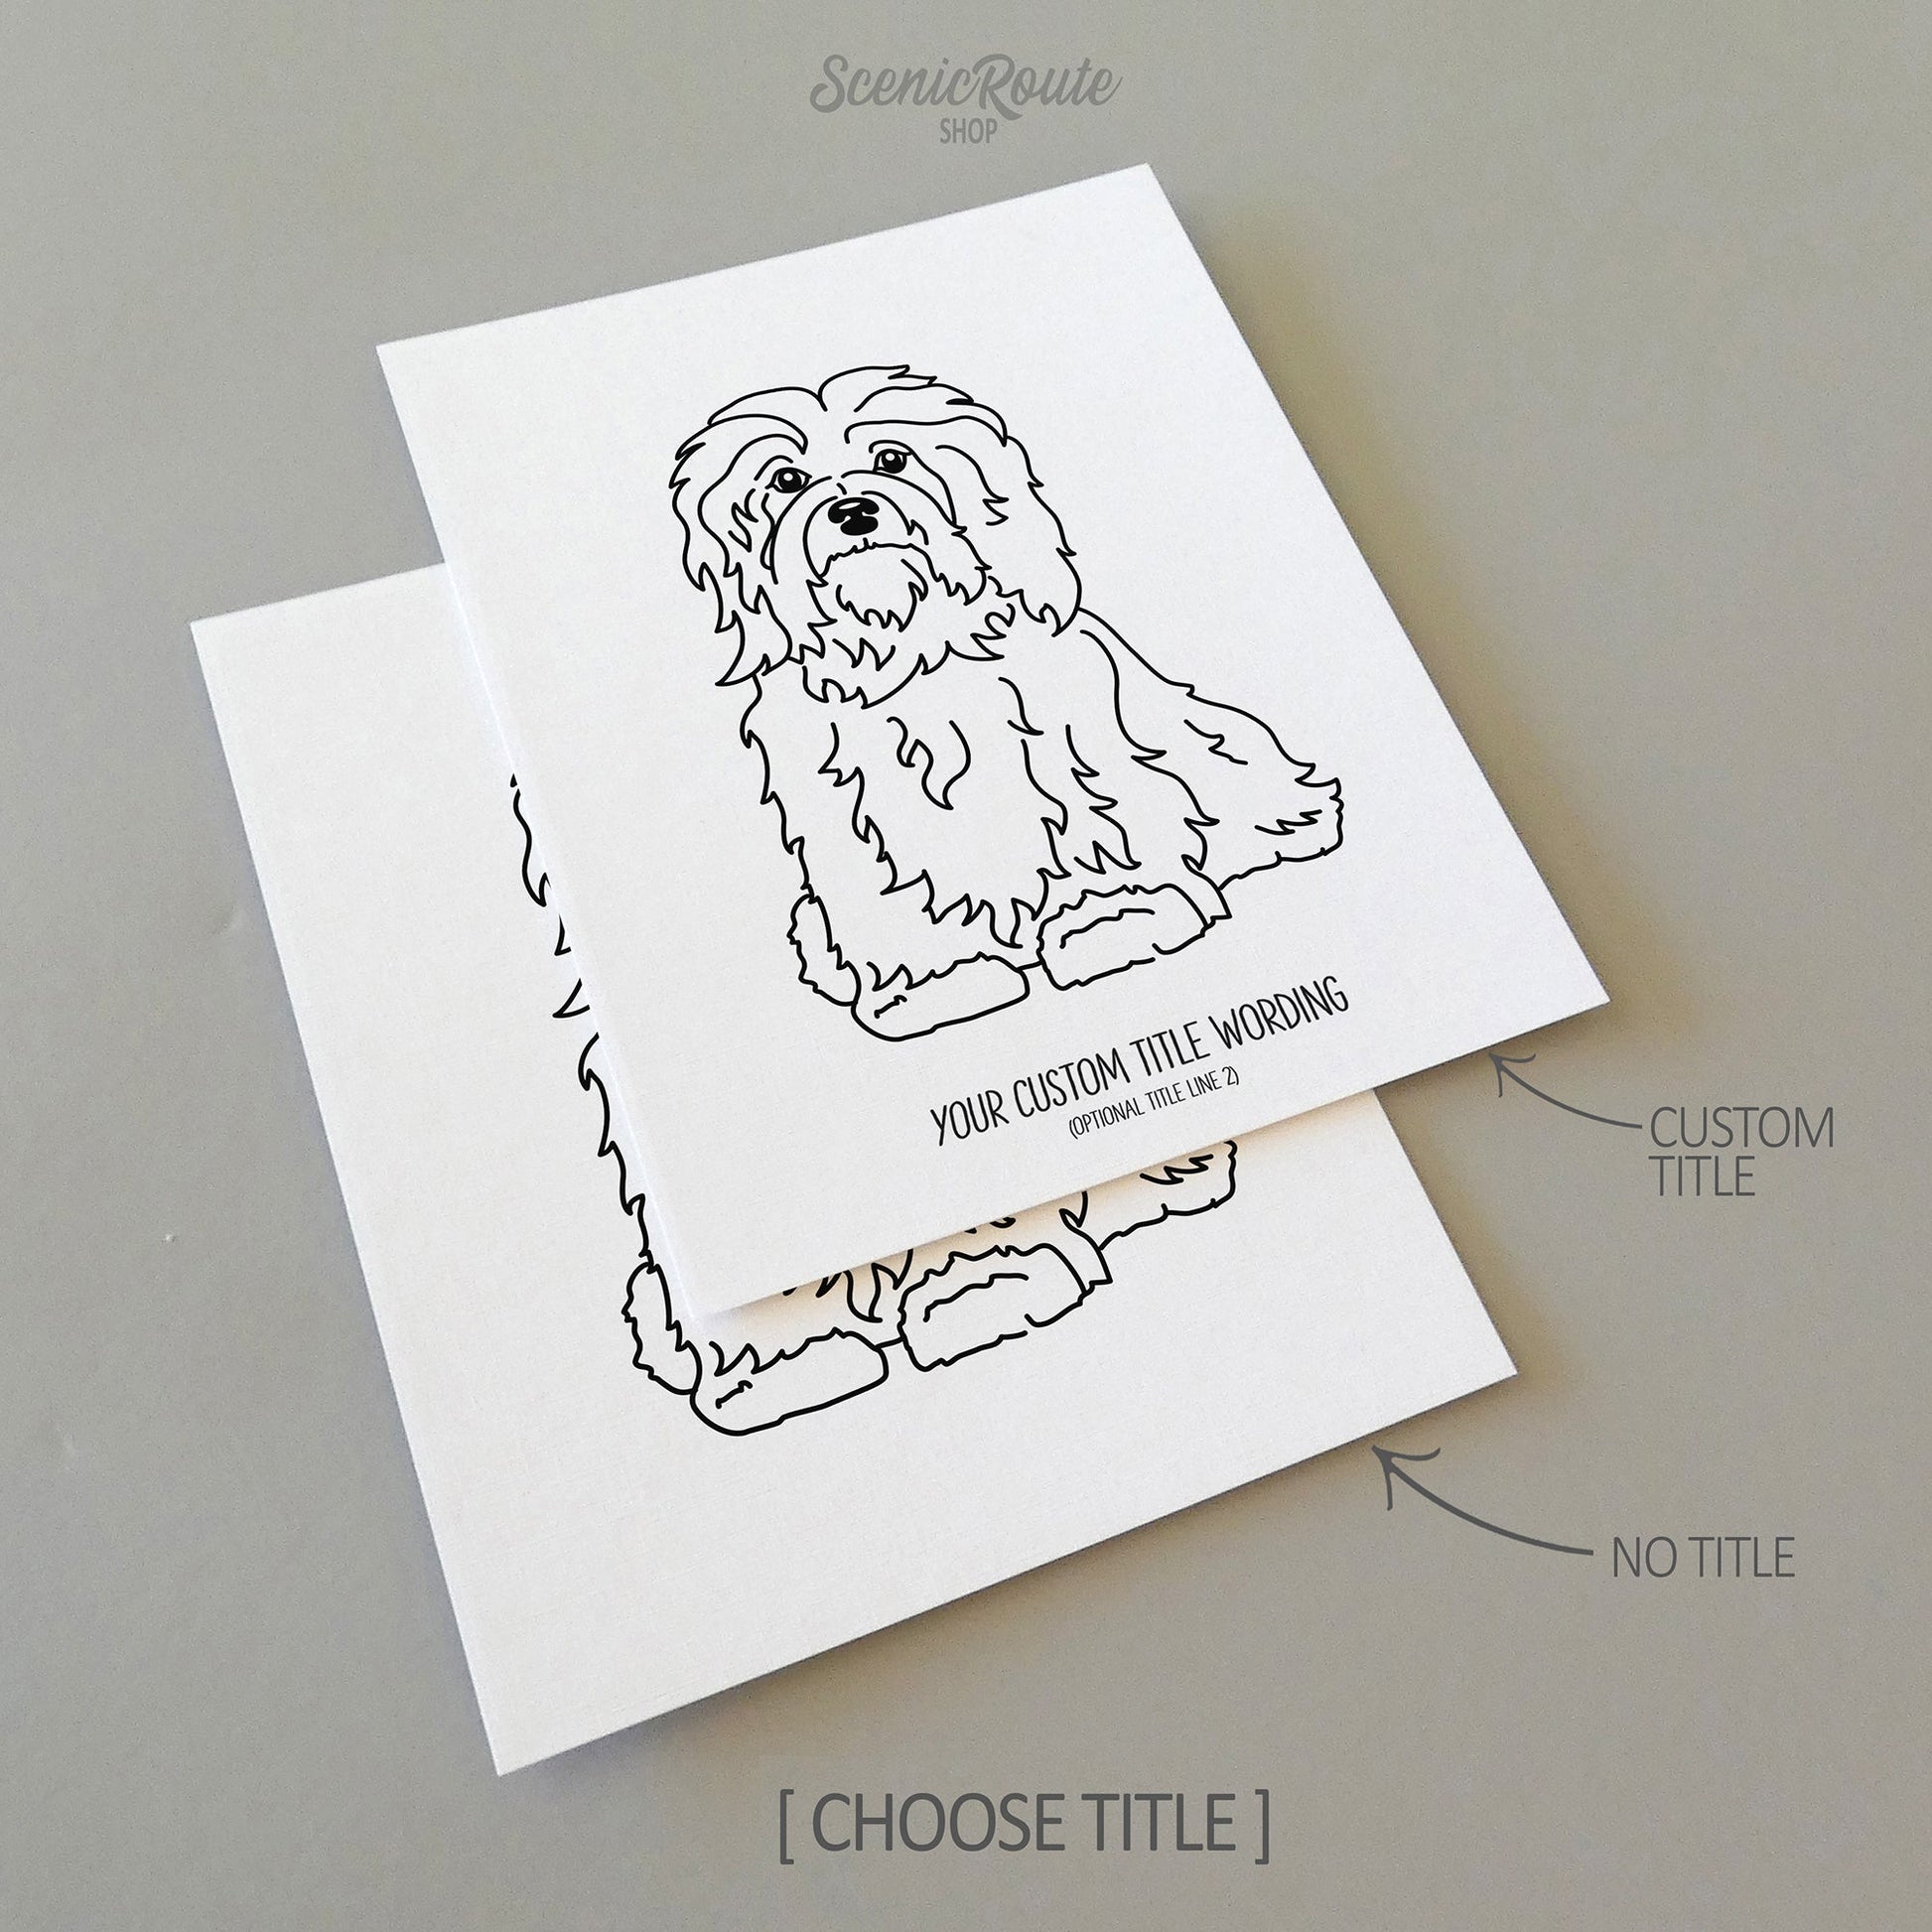 Two line art drawings of a Havanese dog on white linen paper with a gray background.  The pieces are shown with “No Title” and “Custom Title” options for the available art print options.